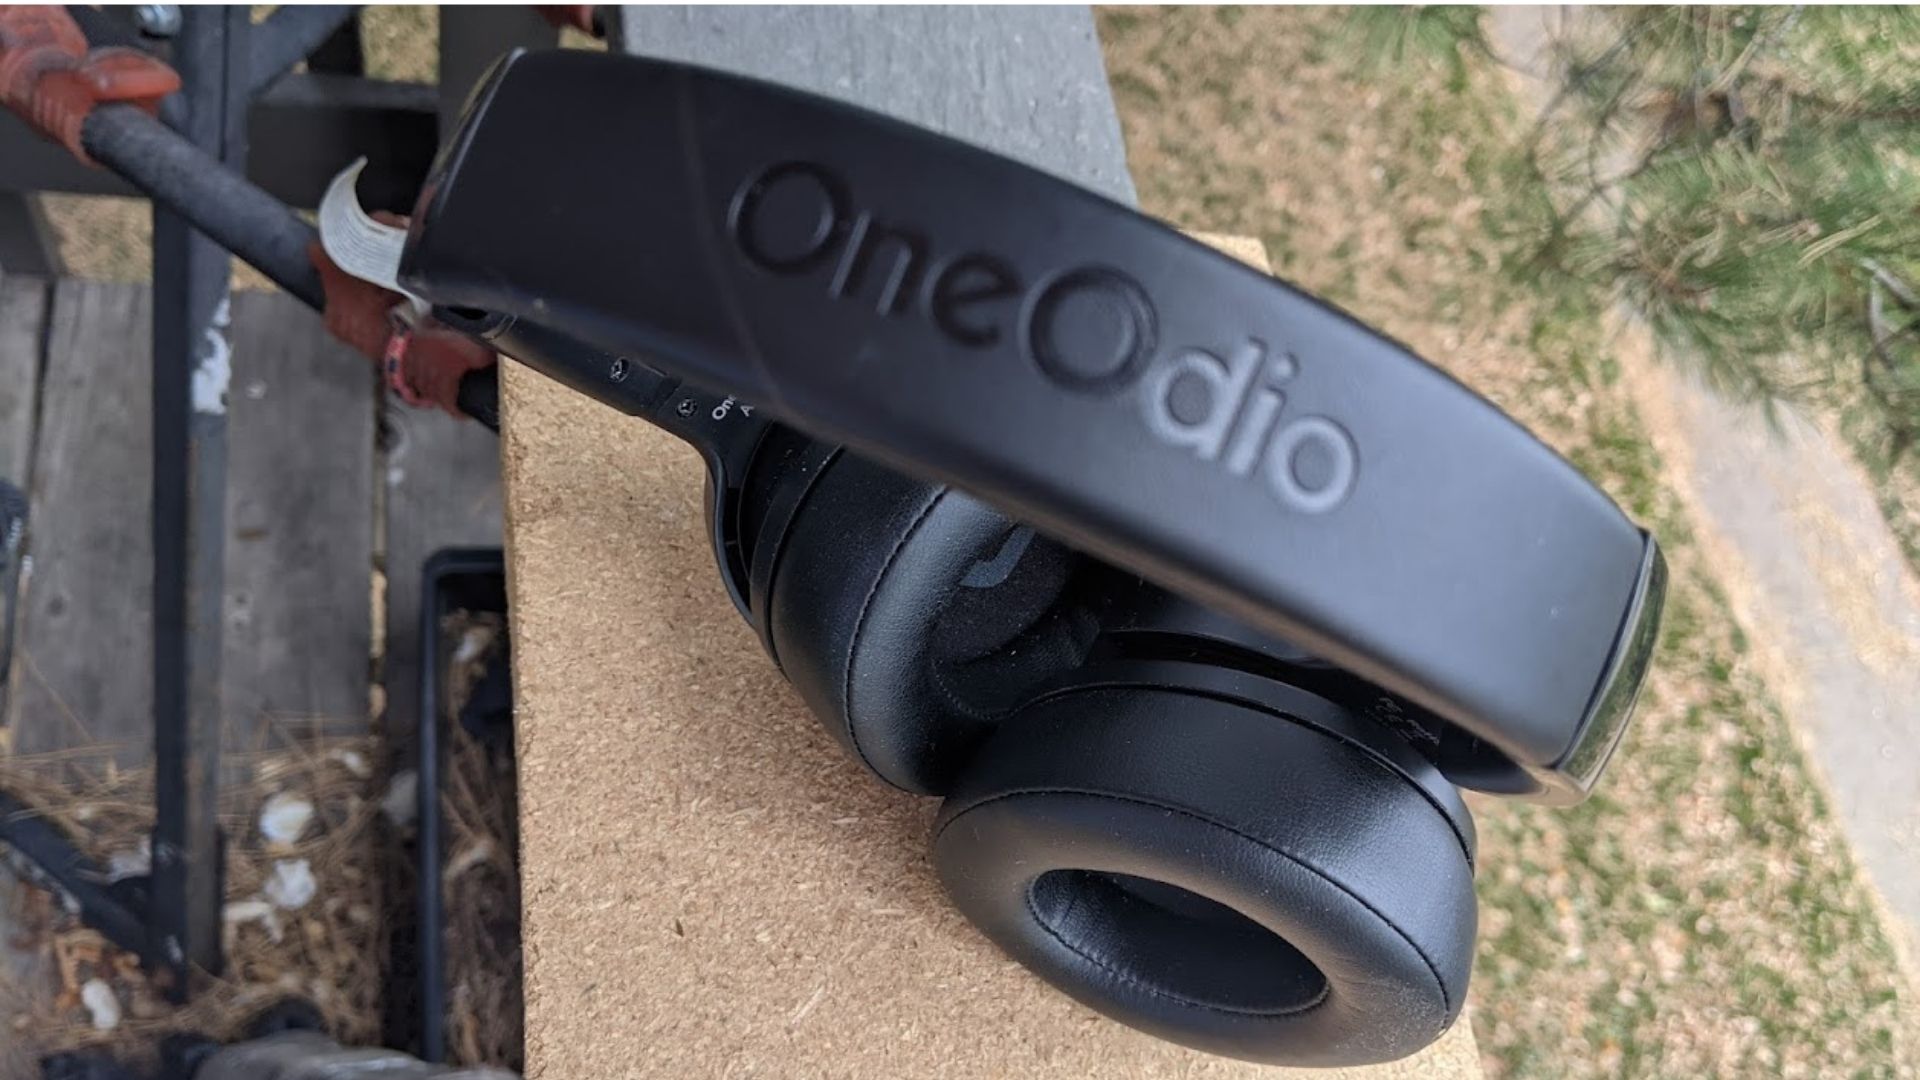 OneOdio A30 Noise Cancelling Bluetooth Heaphones